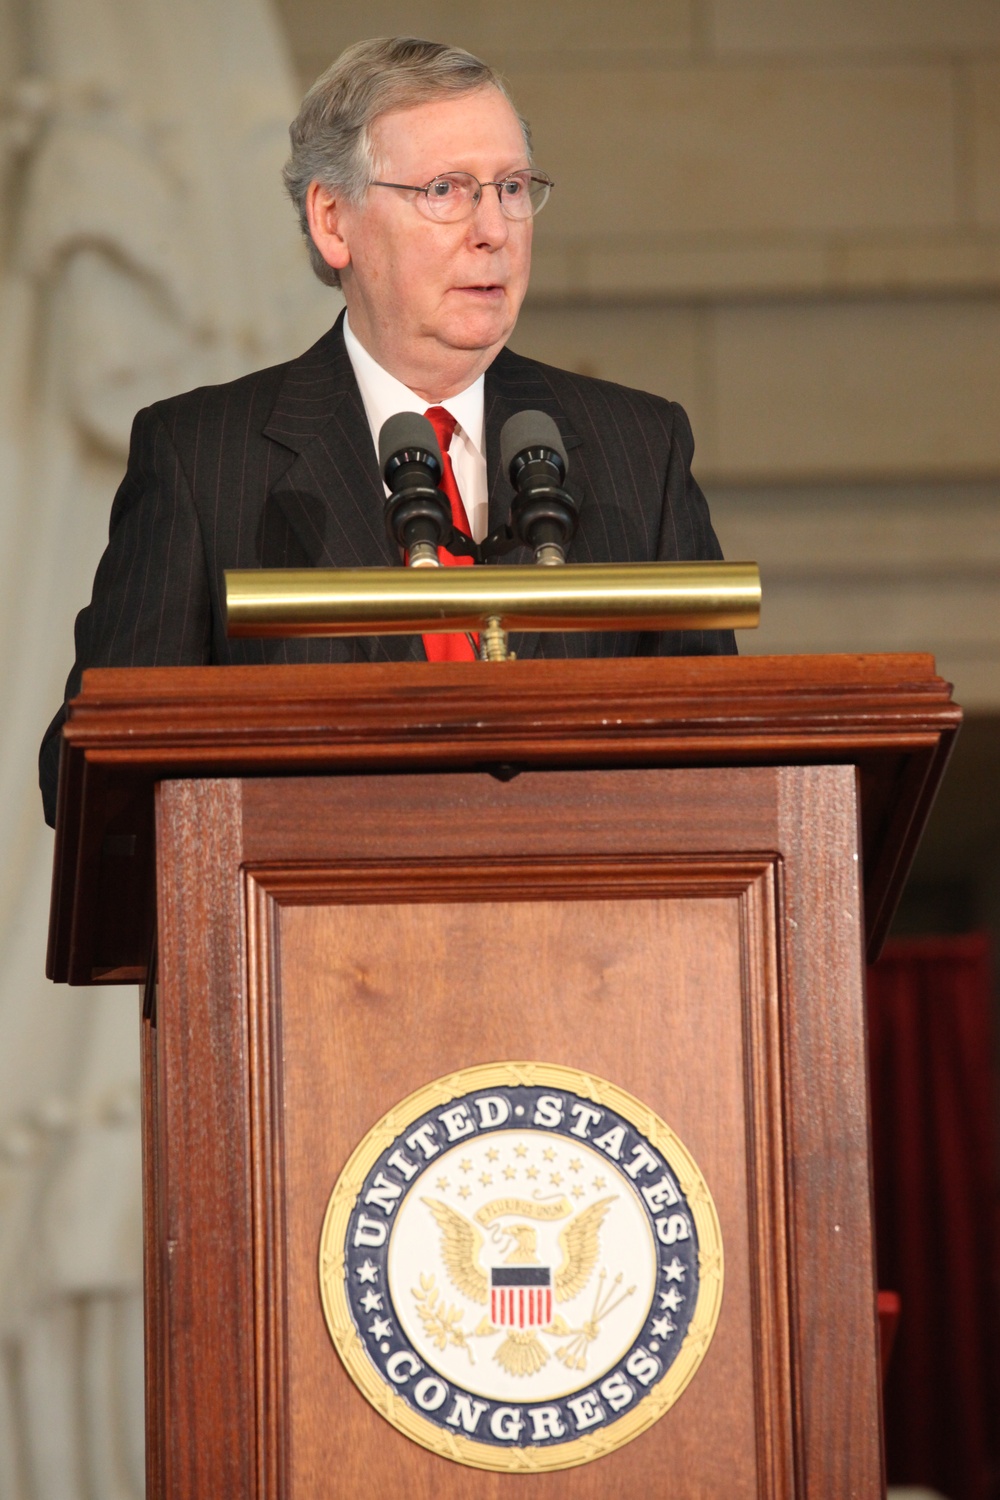 Congressional Gold Medal ceremony